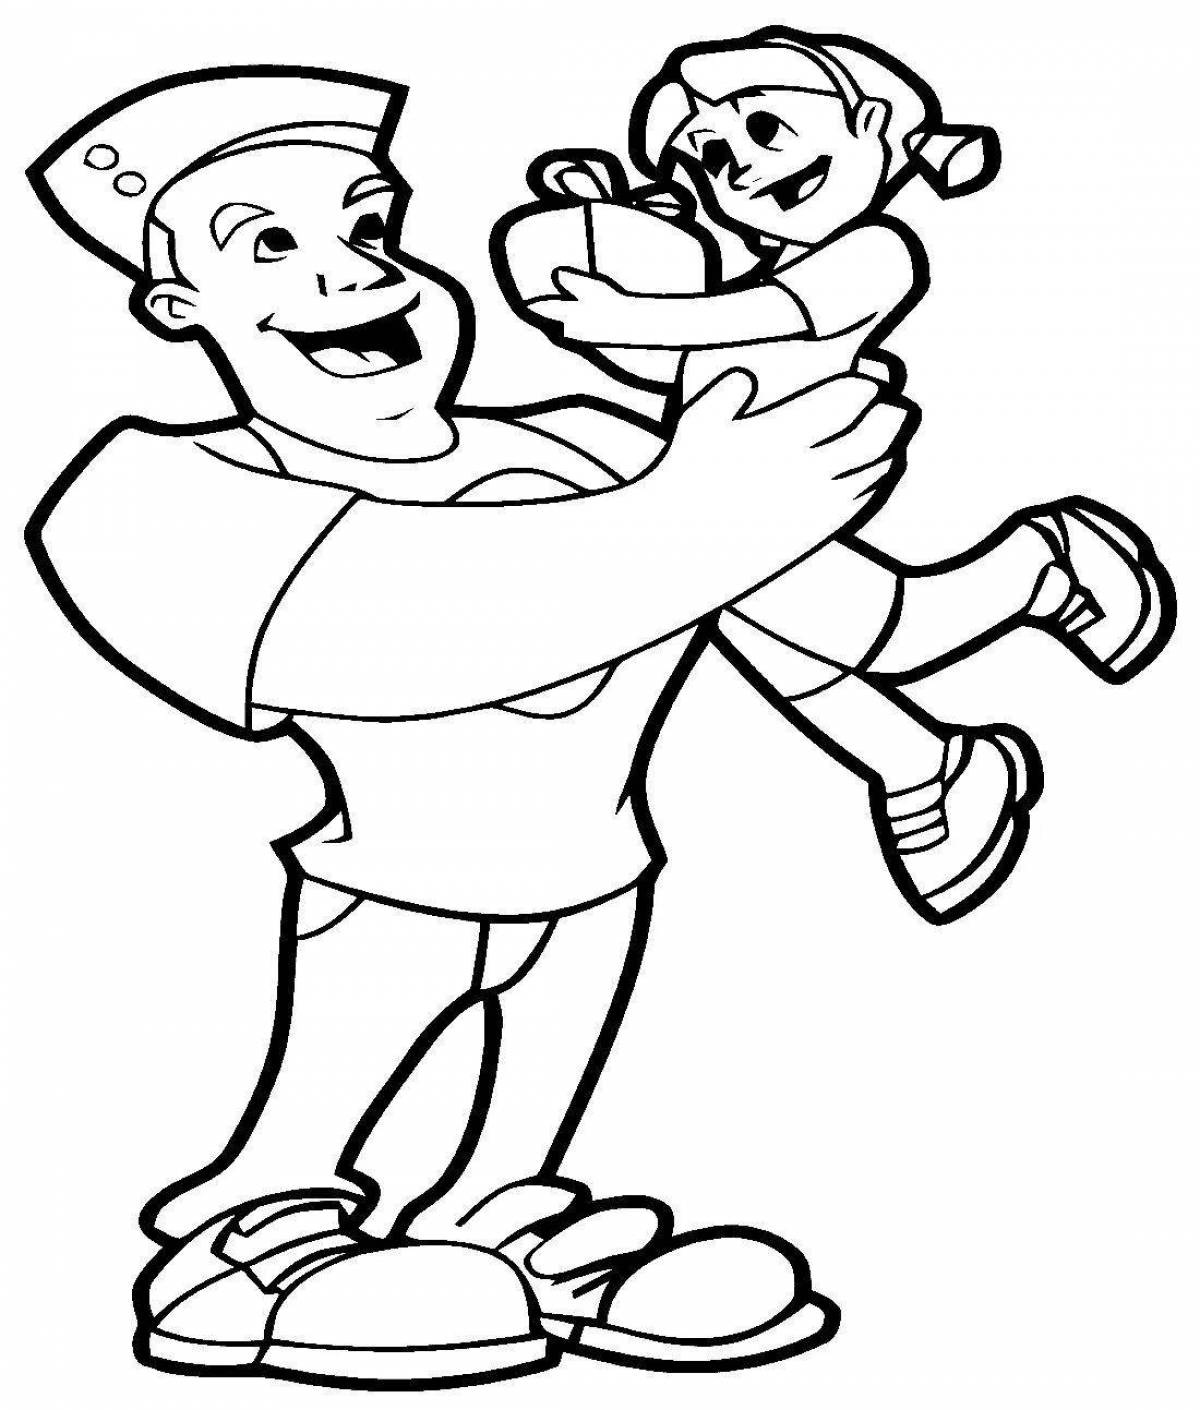 Exciting dad and daughter coloring book